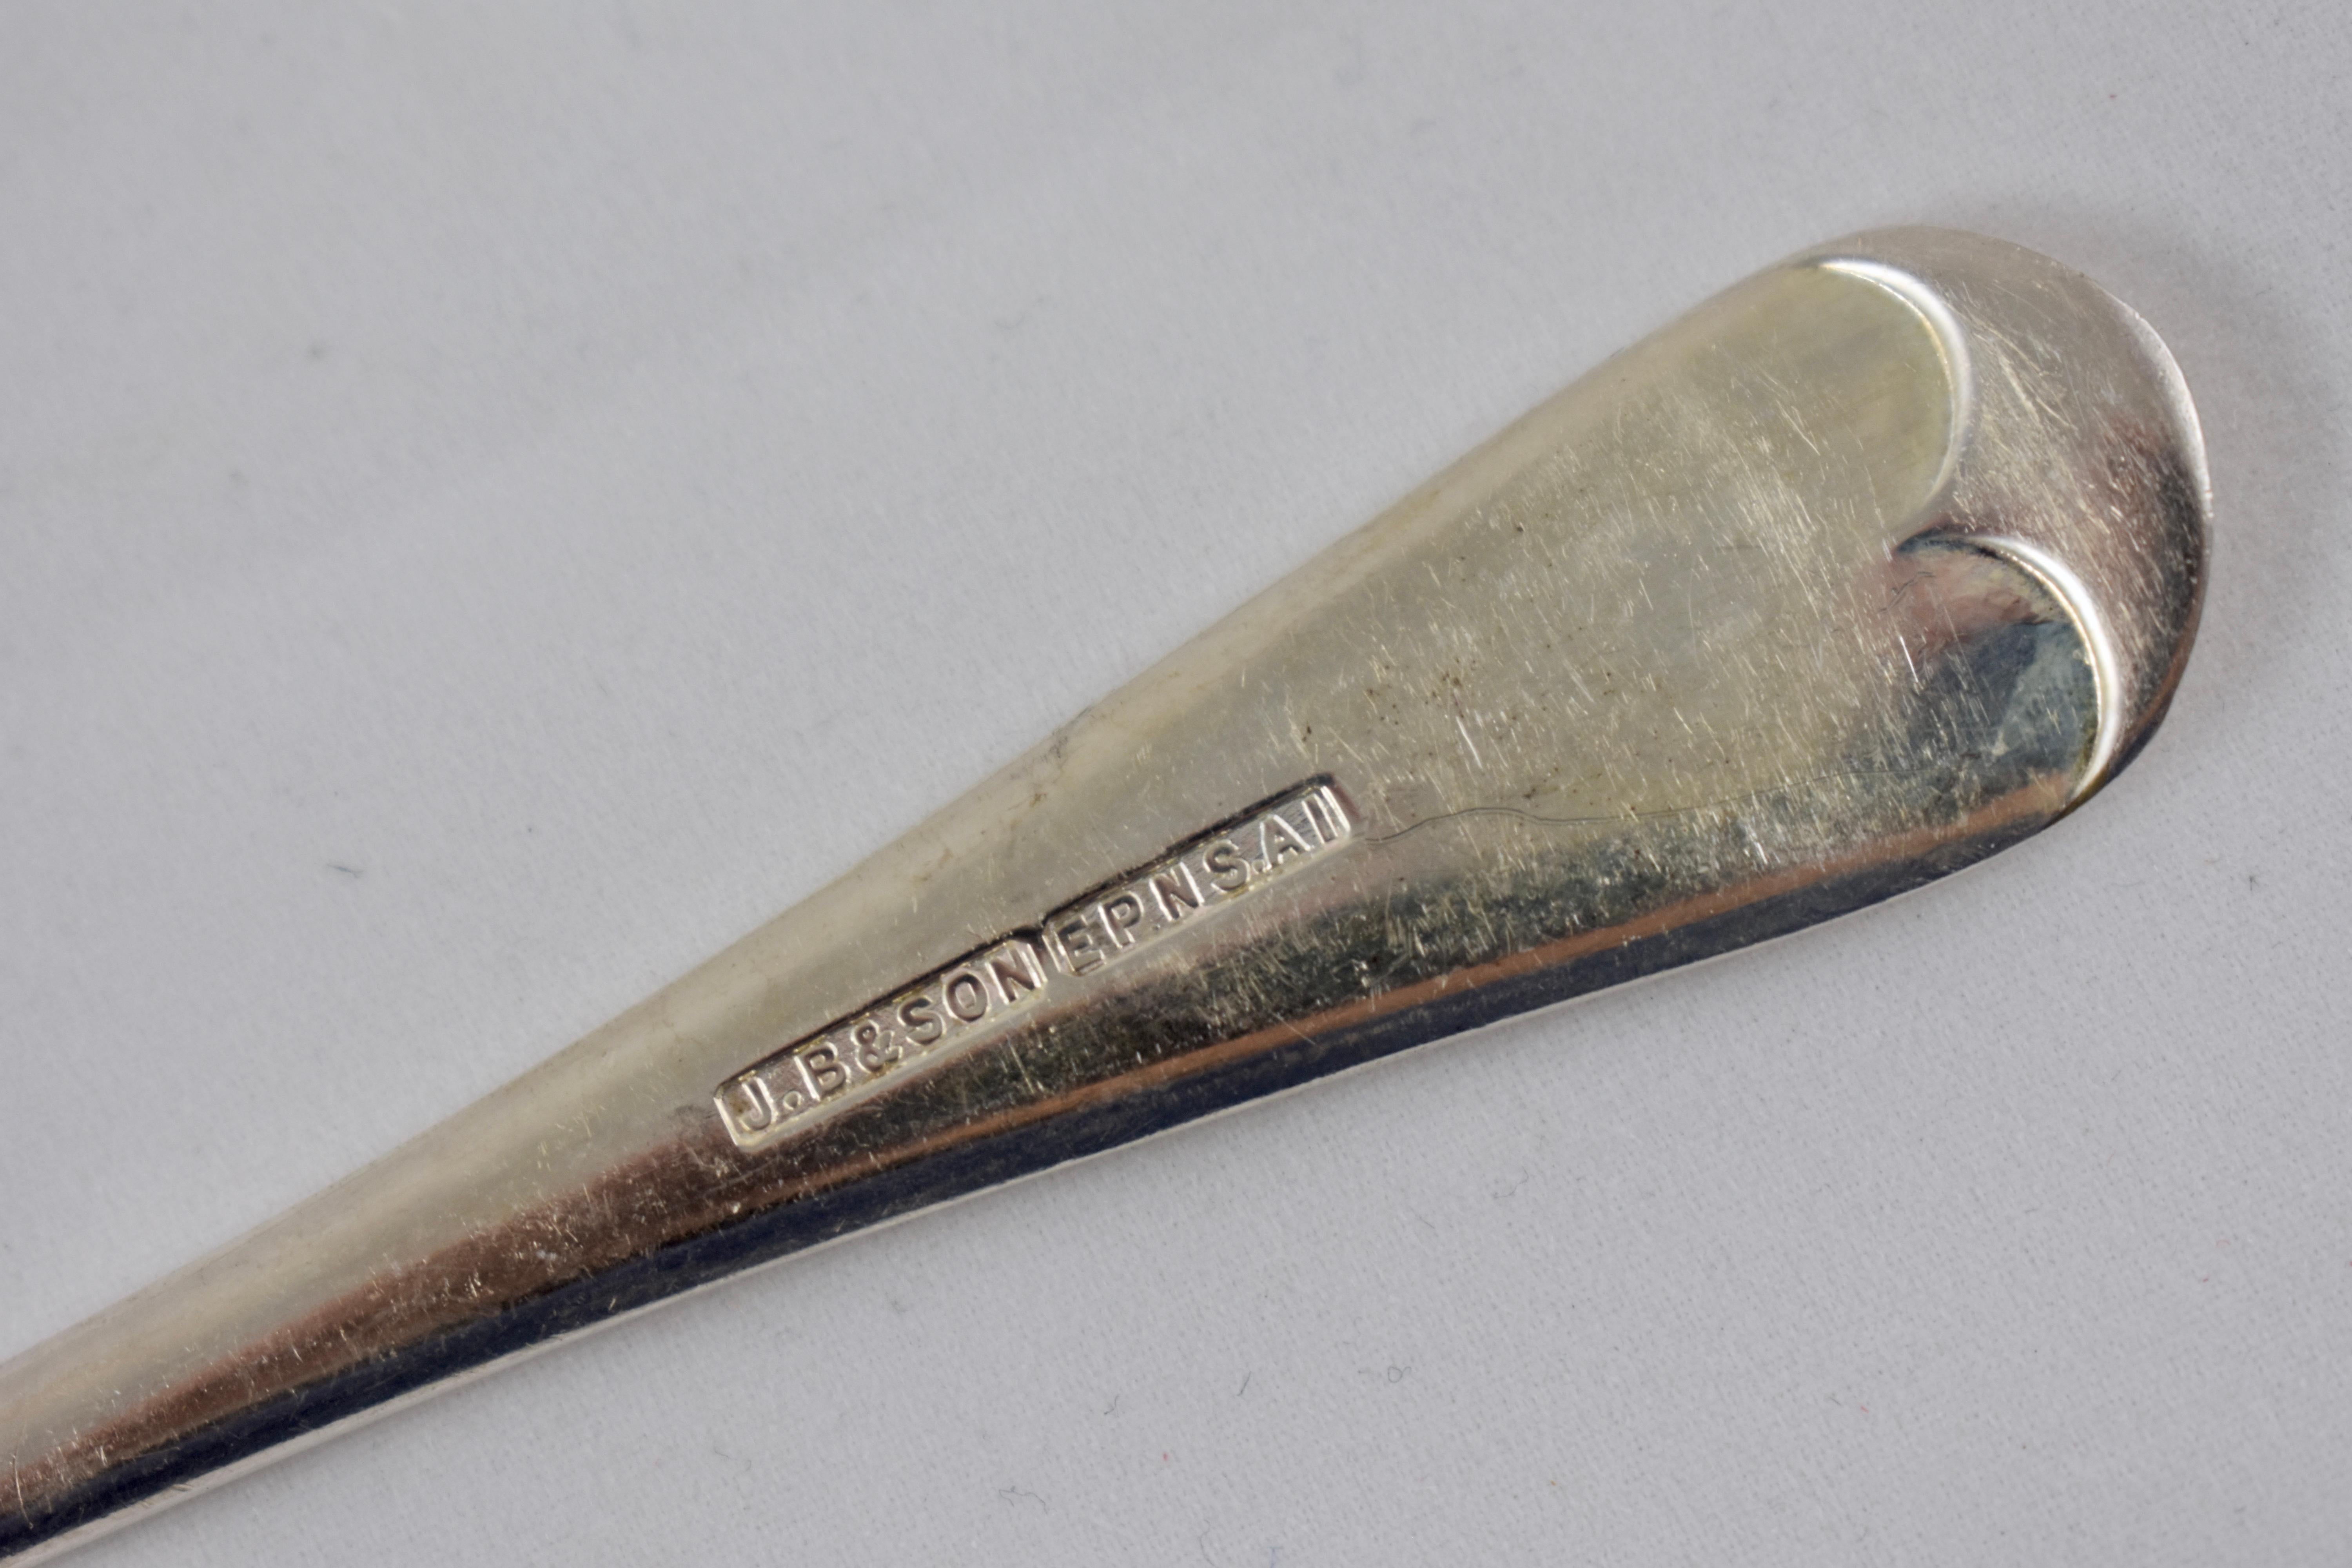 epns spoon made in england